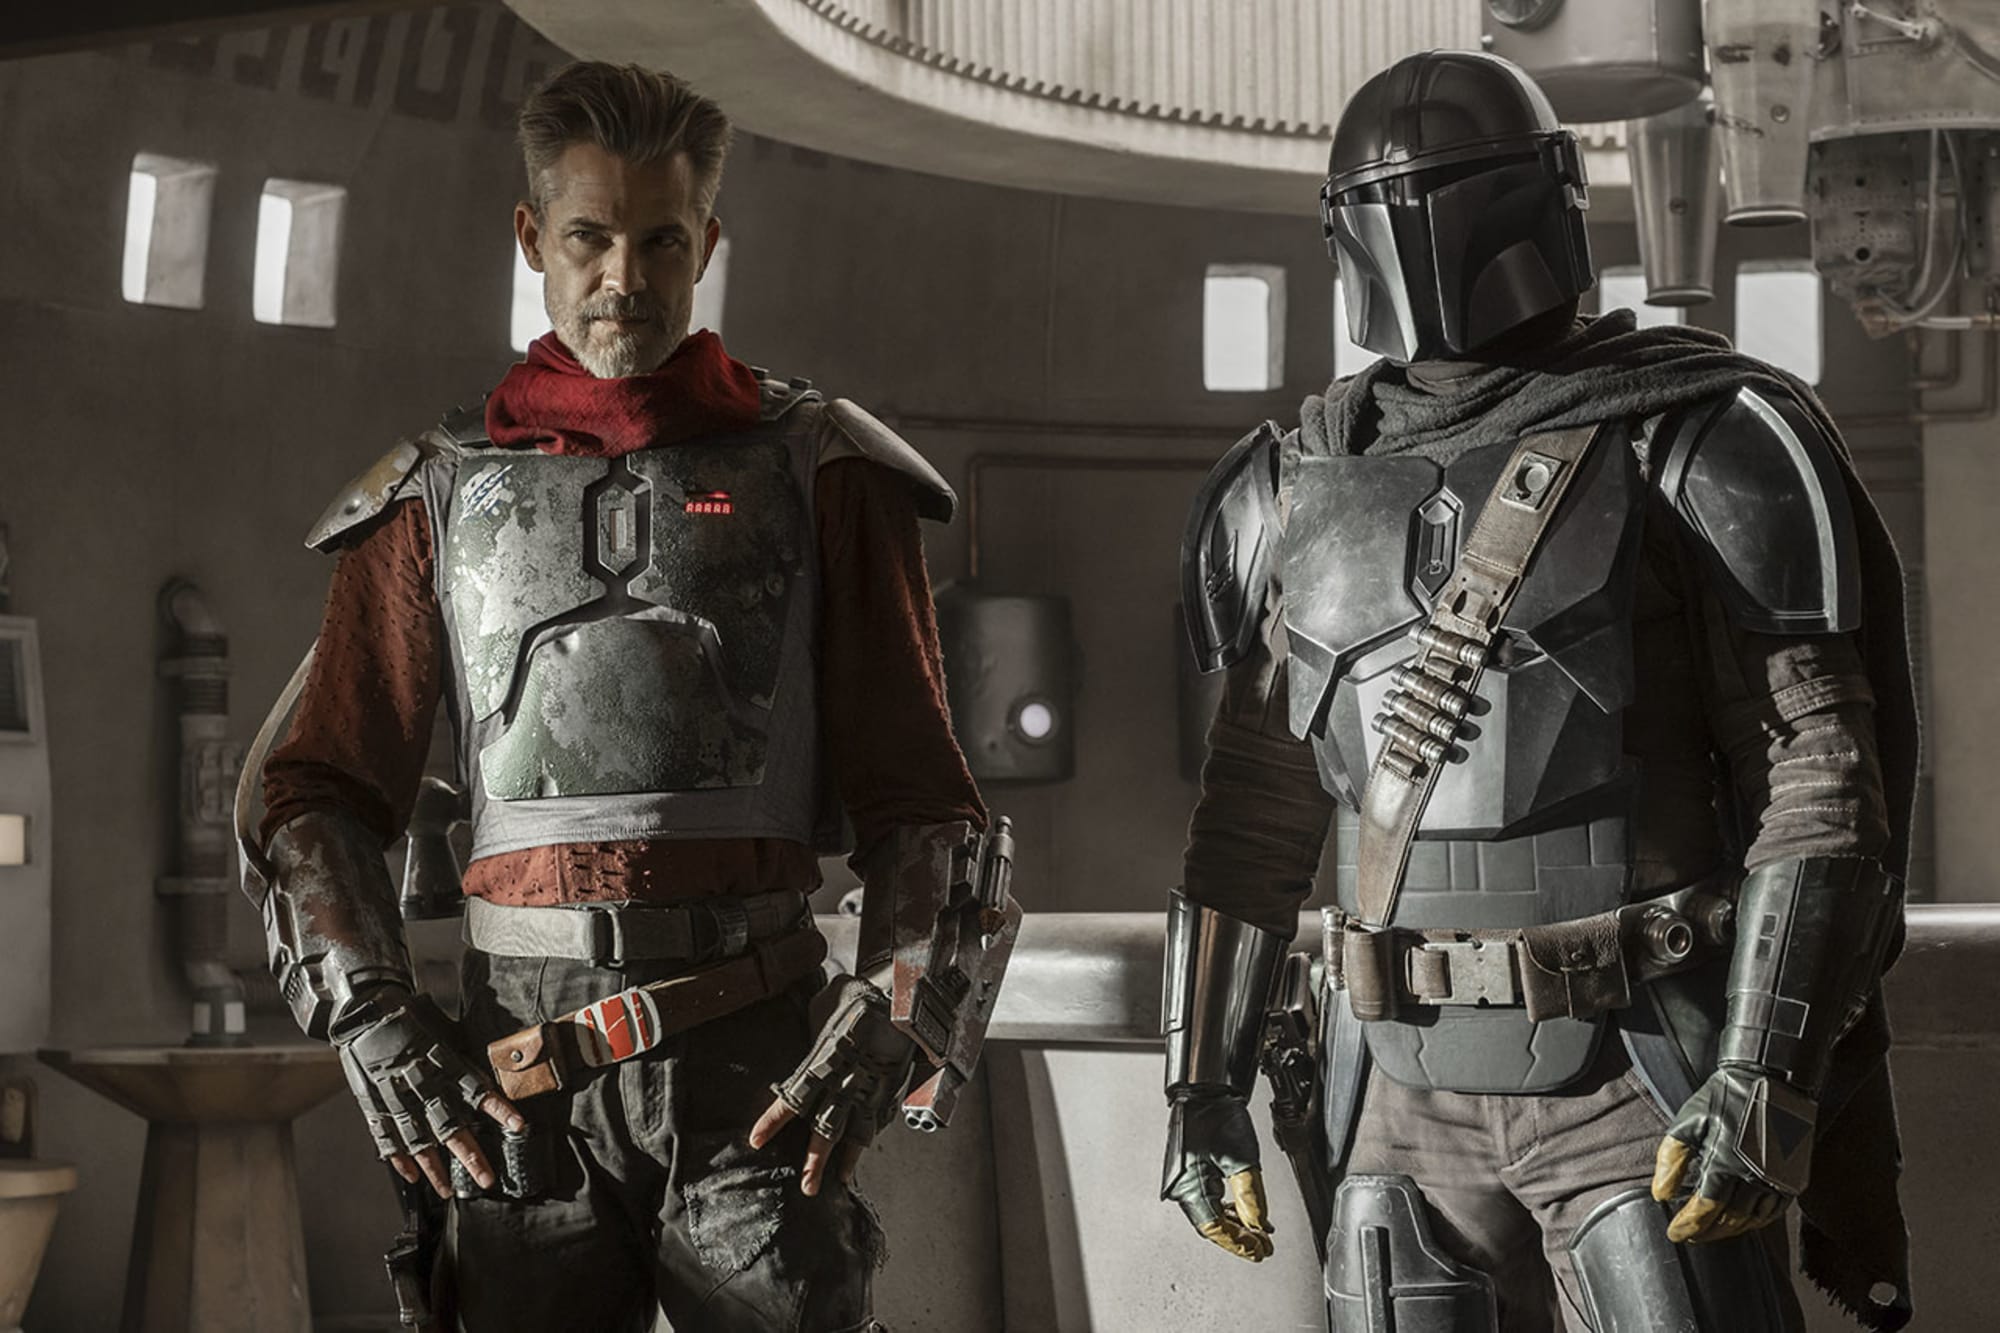 Din and Cobb standing side by side in the Mandalorian